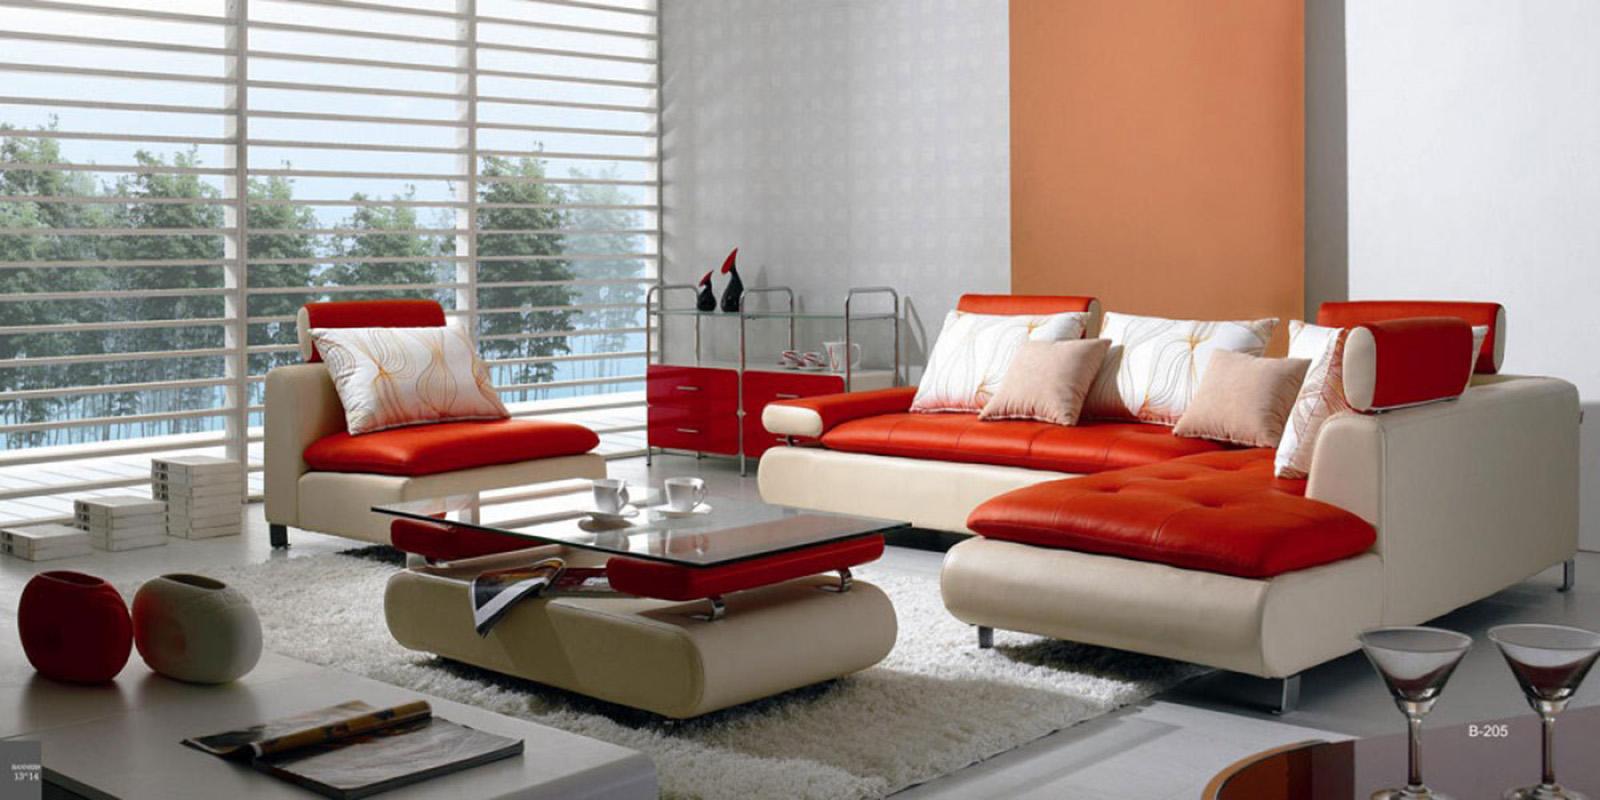 Contemporary, Modern Sectional Sofa Divani Casa B205 VGBNB205 in White, Red Leather Match